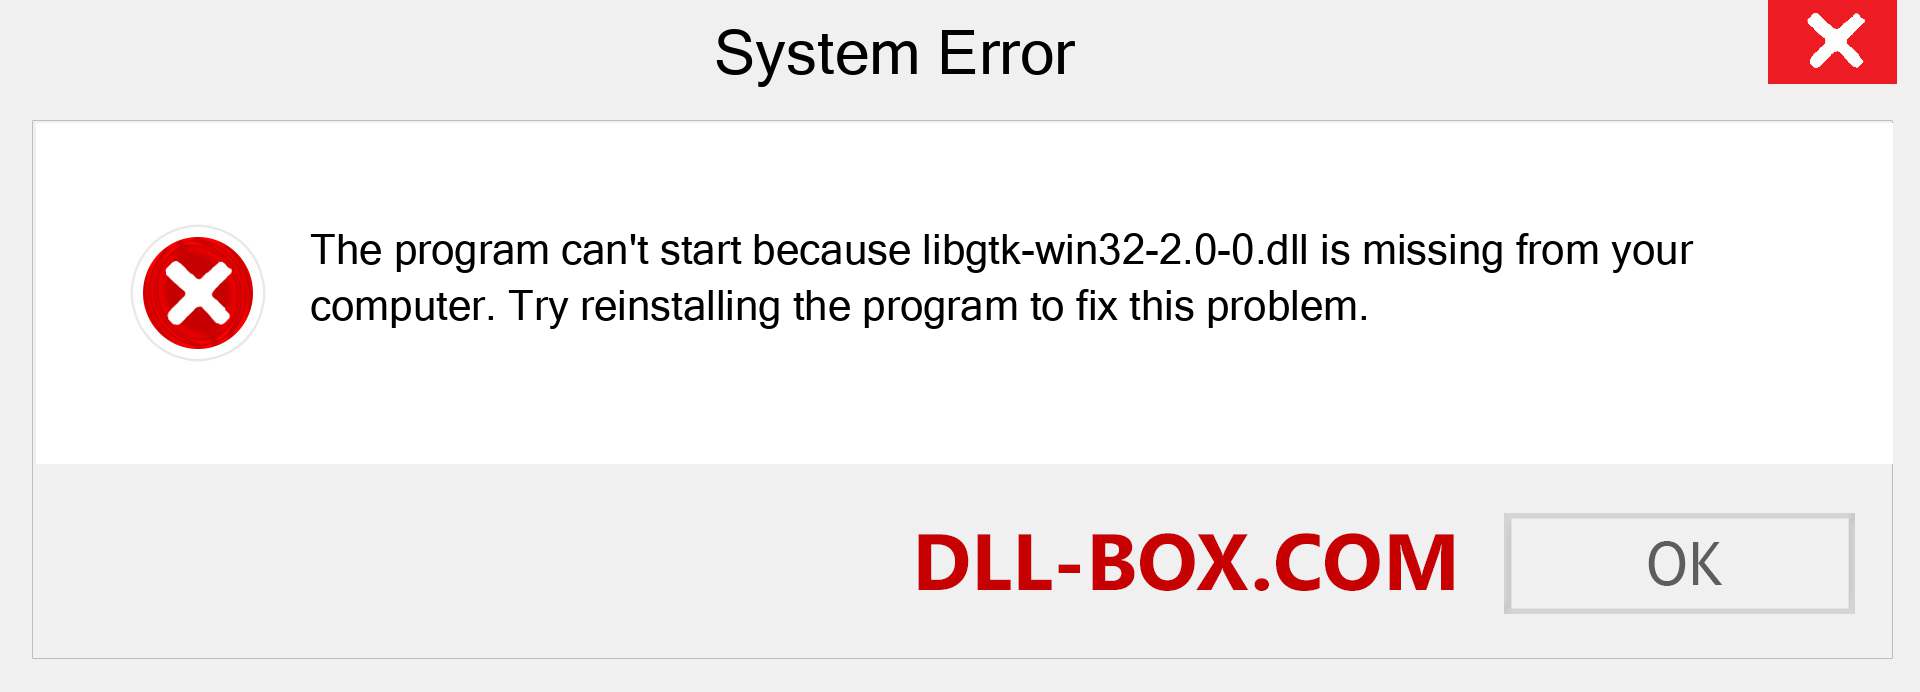  libgtk-win32-2.0-0.dll file is missing?. Download for Windows 7, 8, 10 - Fix  libgtk-win32-2.0-0 dll Missing Error on Windows, photos, images